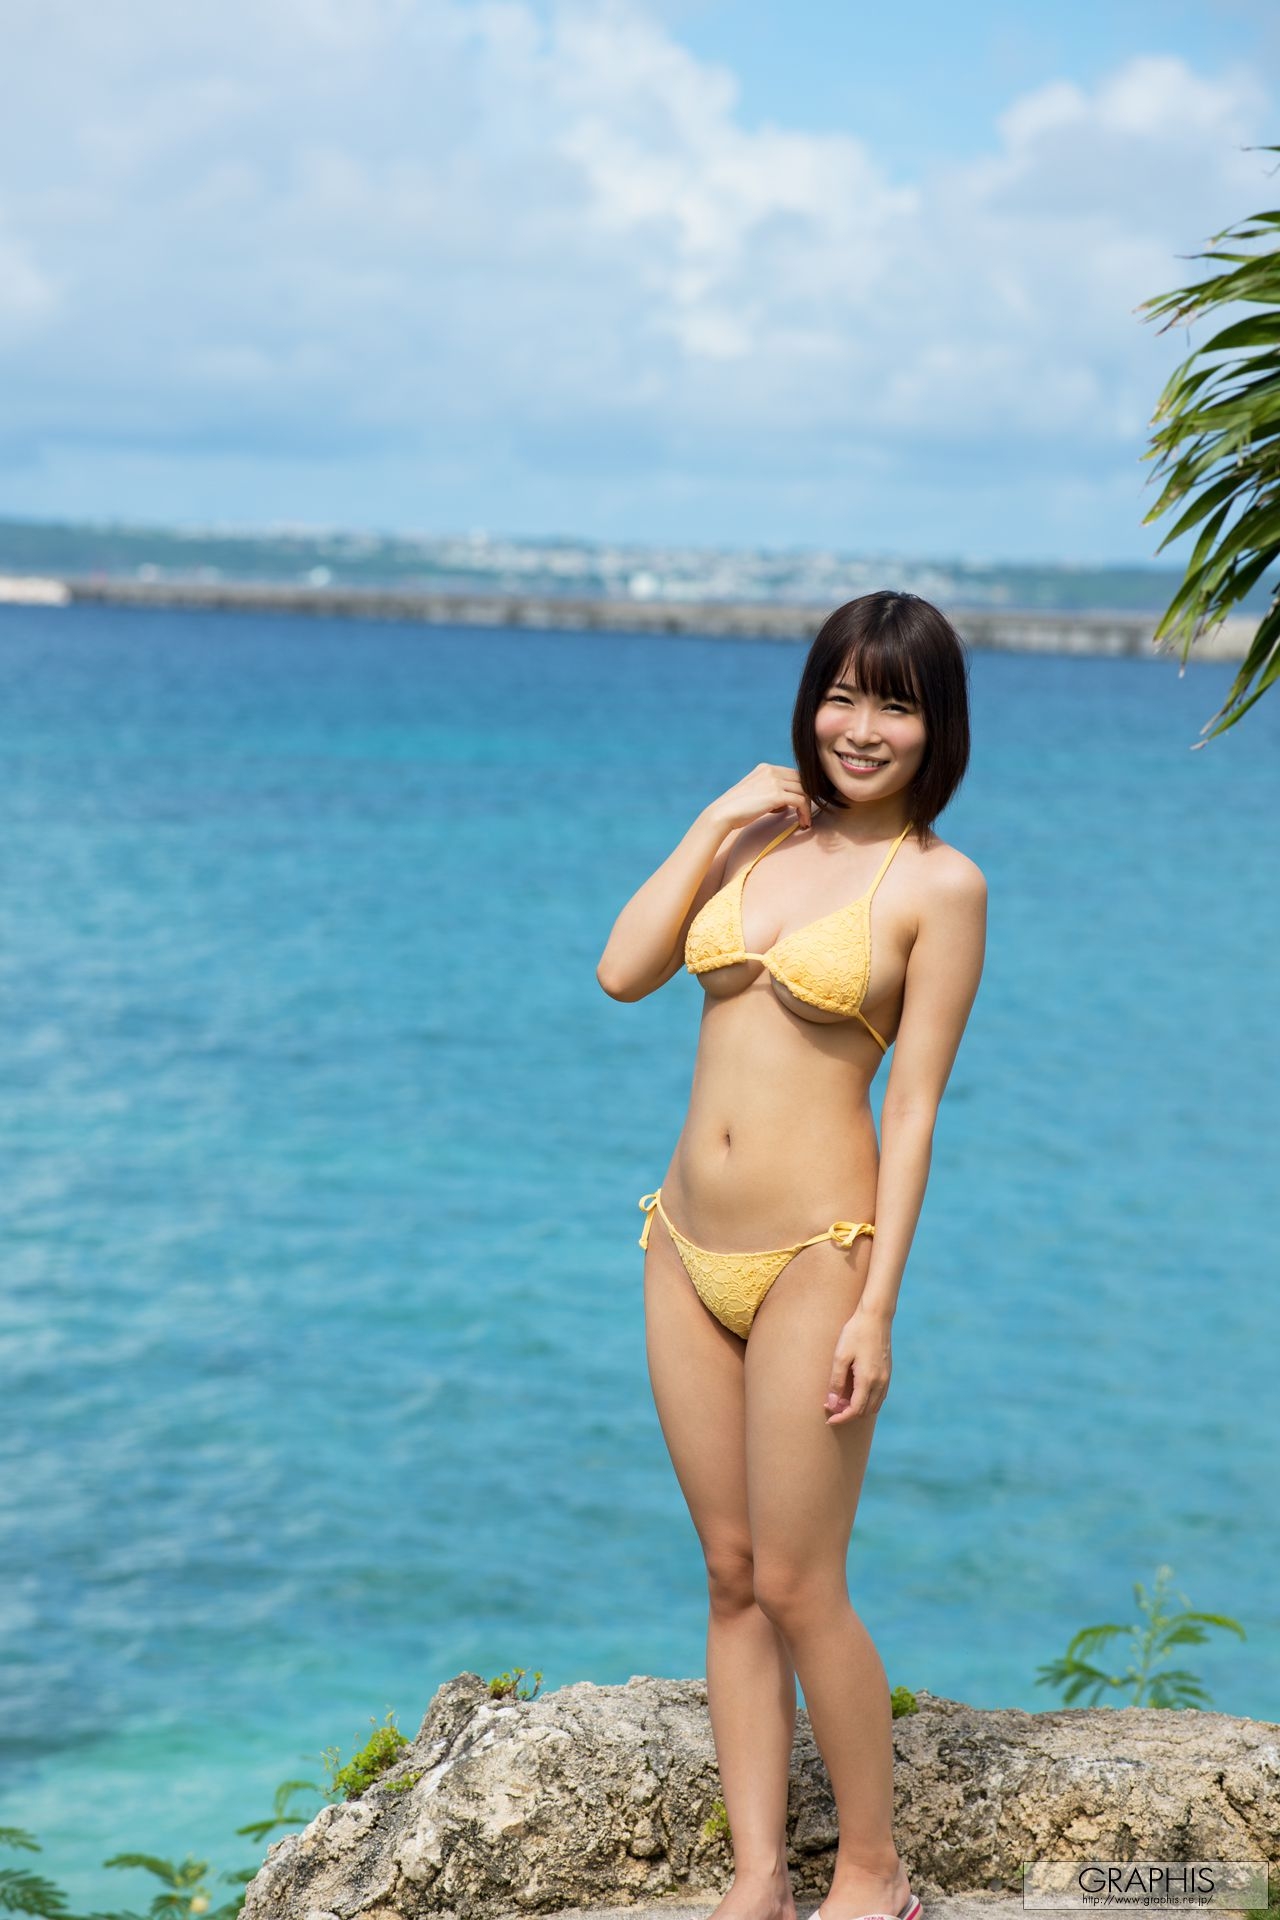 [Graphis] Gals444 河合あすな《Godly beautiful breast》  第-1张